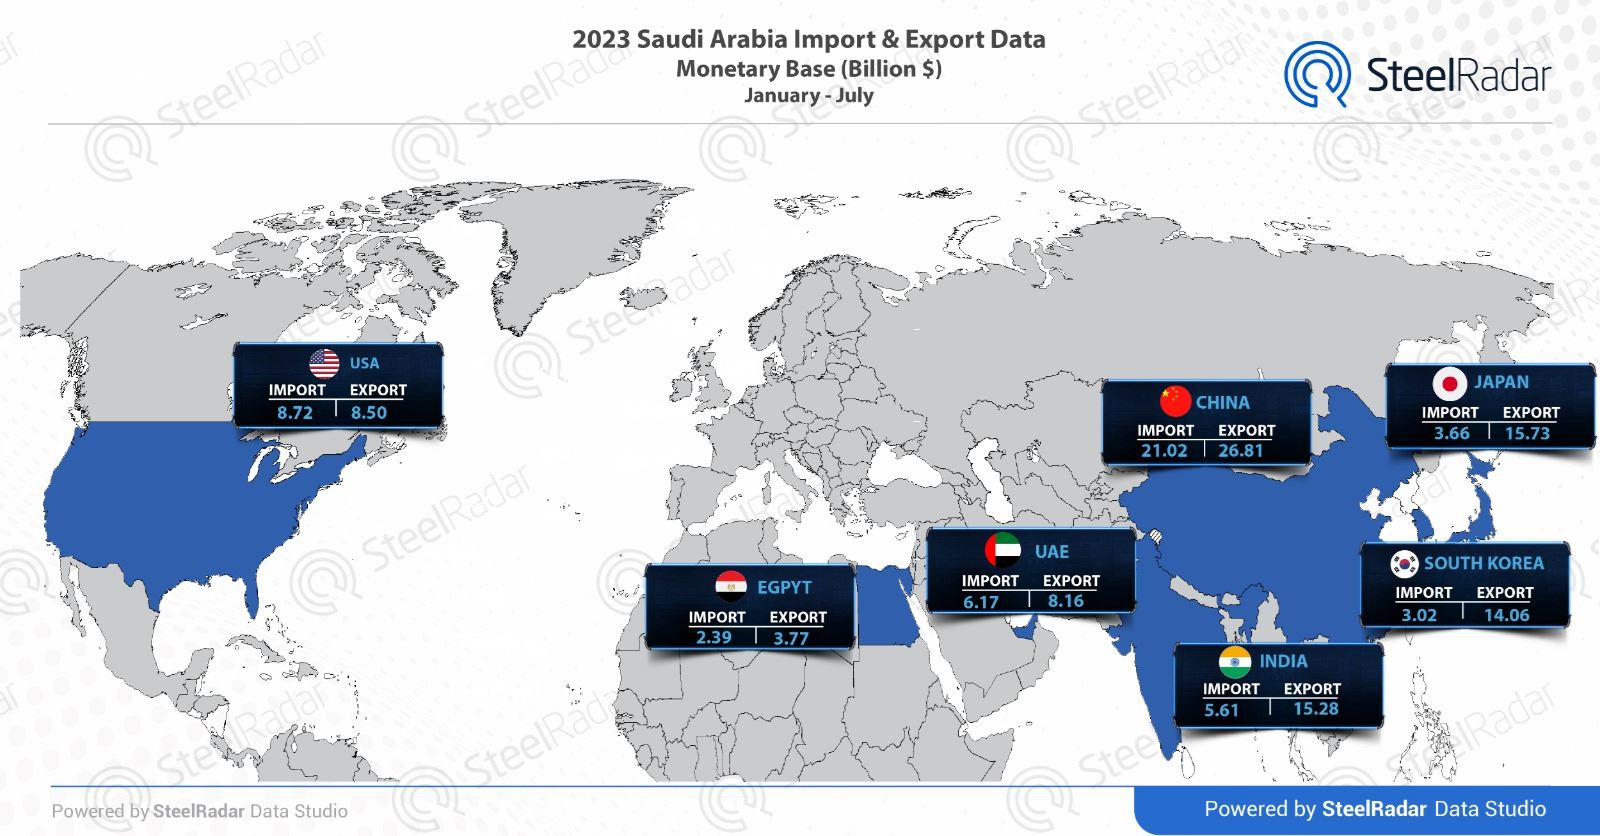 The most prominent trading partners of Saudi Arabia in the first half of 2023